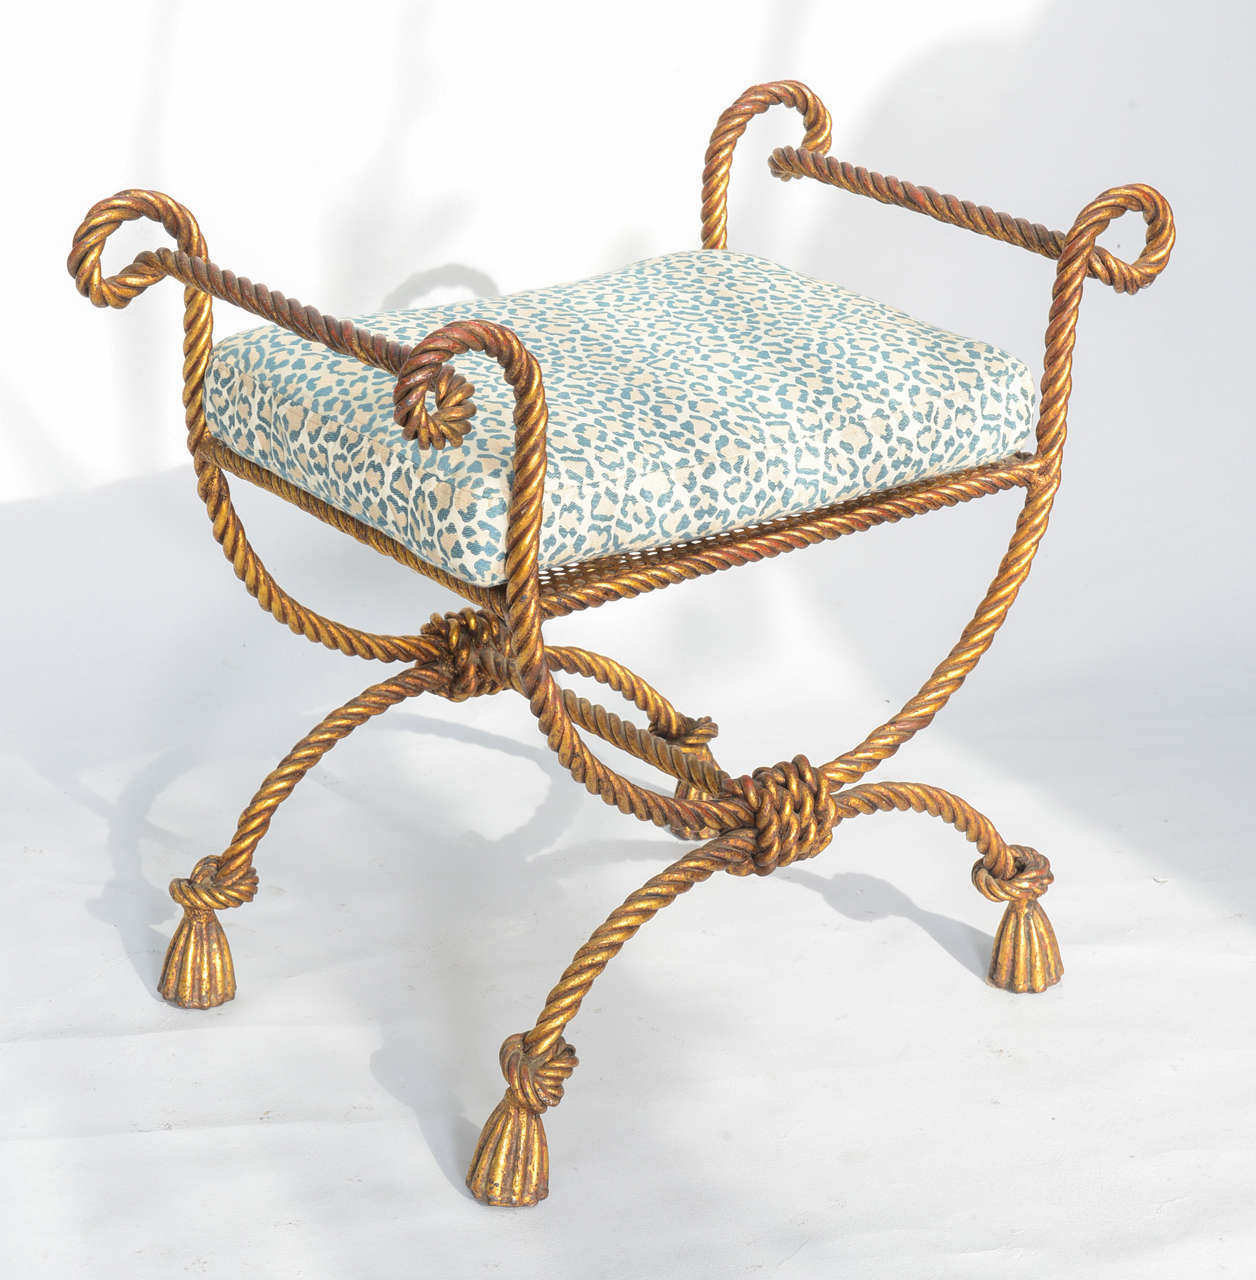 Vanity bench, by Niccolini, of heavy-gage gilded iron, fashioned as rope, having a rectangular cushion flanked by scrolling arms, on X-frame legs with rope-wrapped stretcher, terminating in tassel feet.

Stock ID: D1882